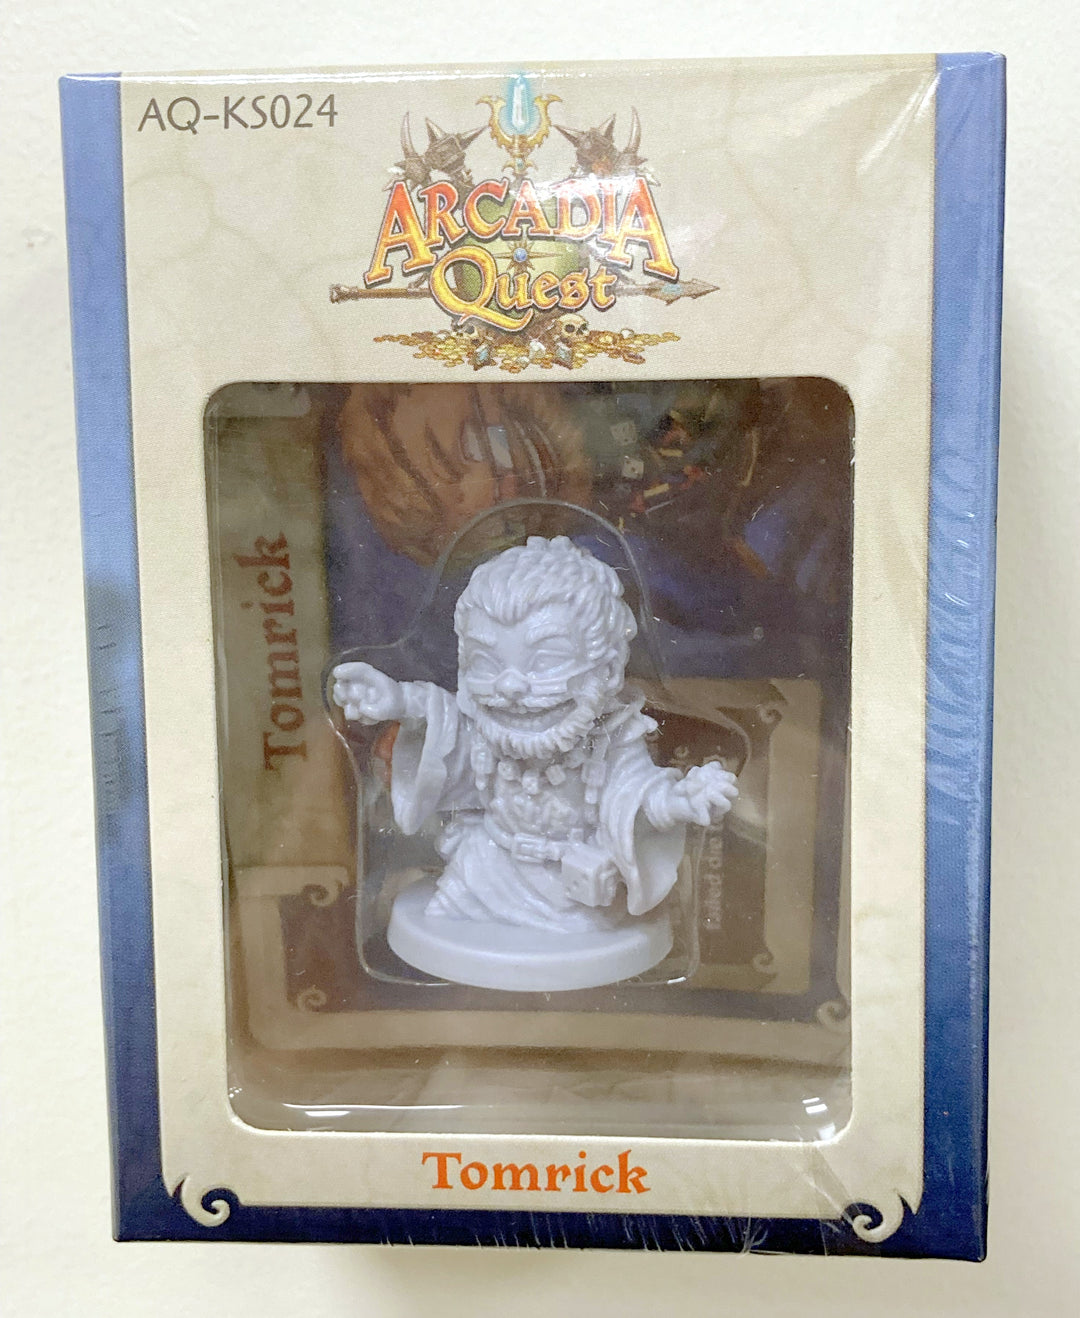 A picture of a miniature figurine in its box for use with the board game Arcadia Quest. This figure is labelled Tomrick, and features a bearded man in long robes.